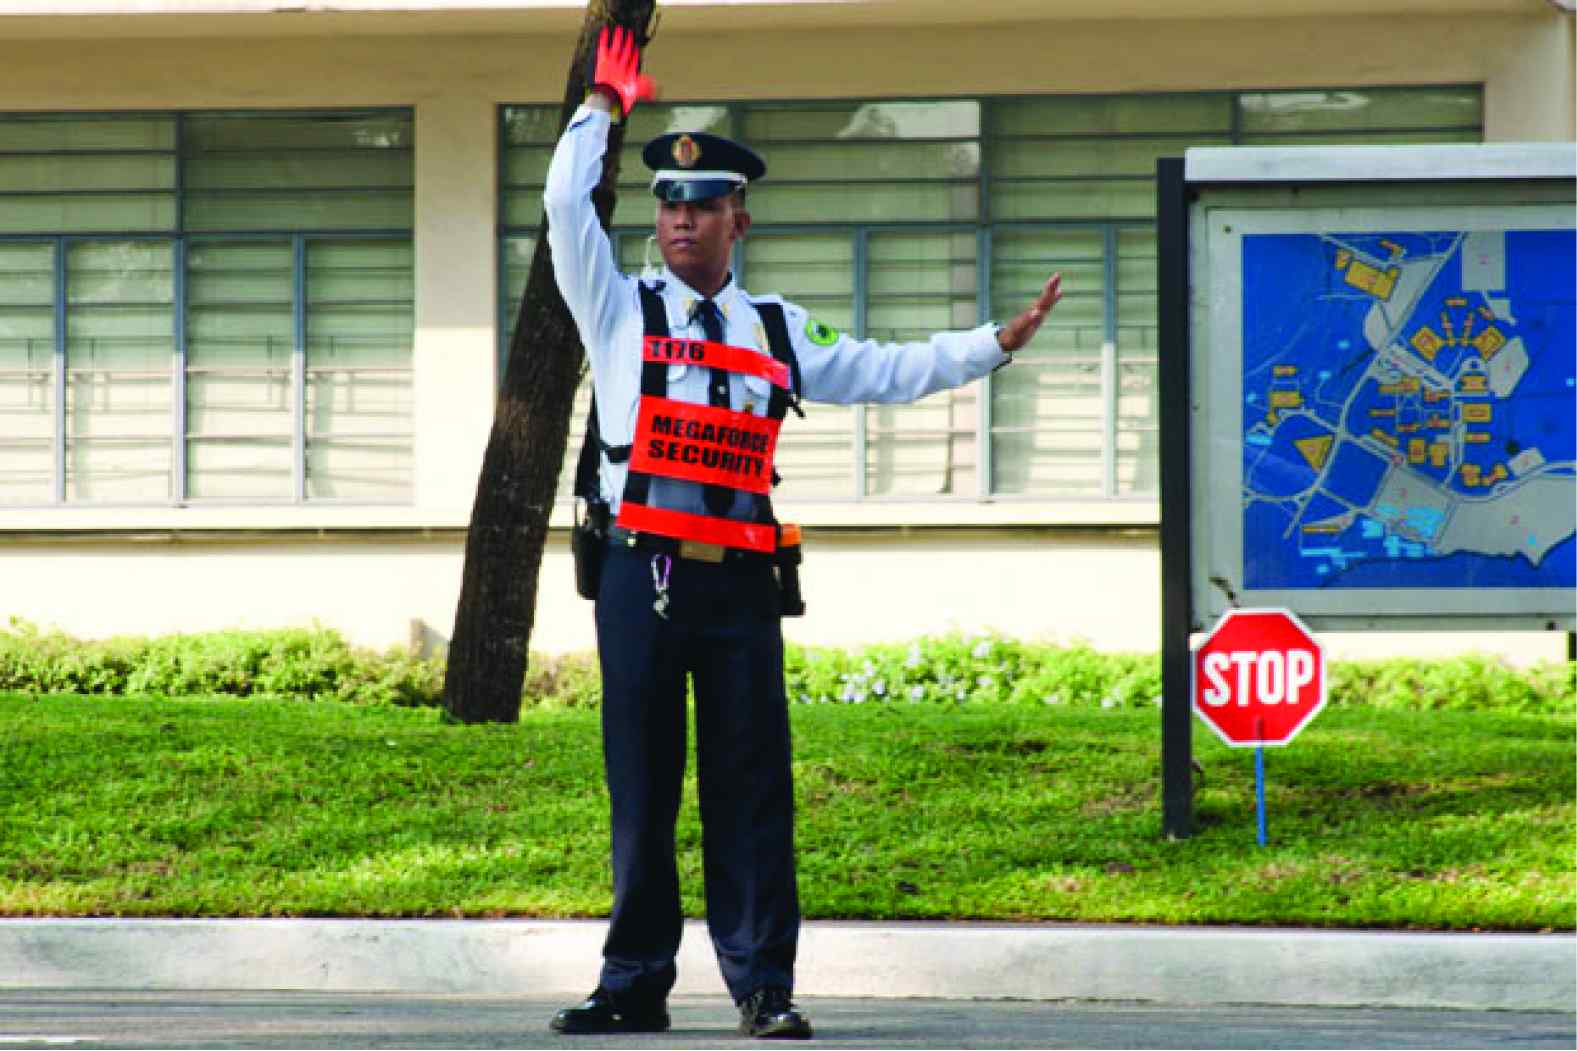 lsis is a security guard company in bangalore